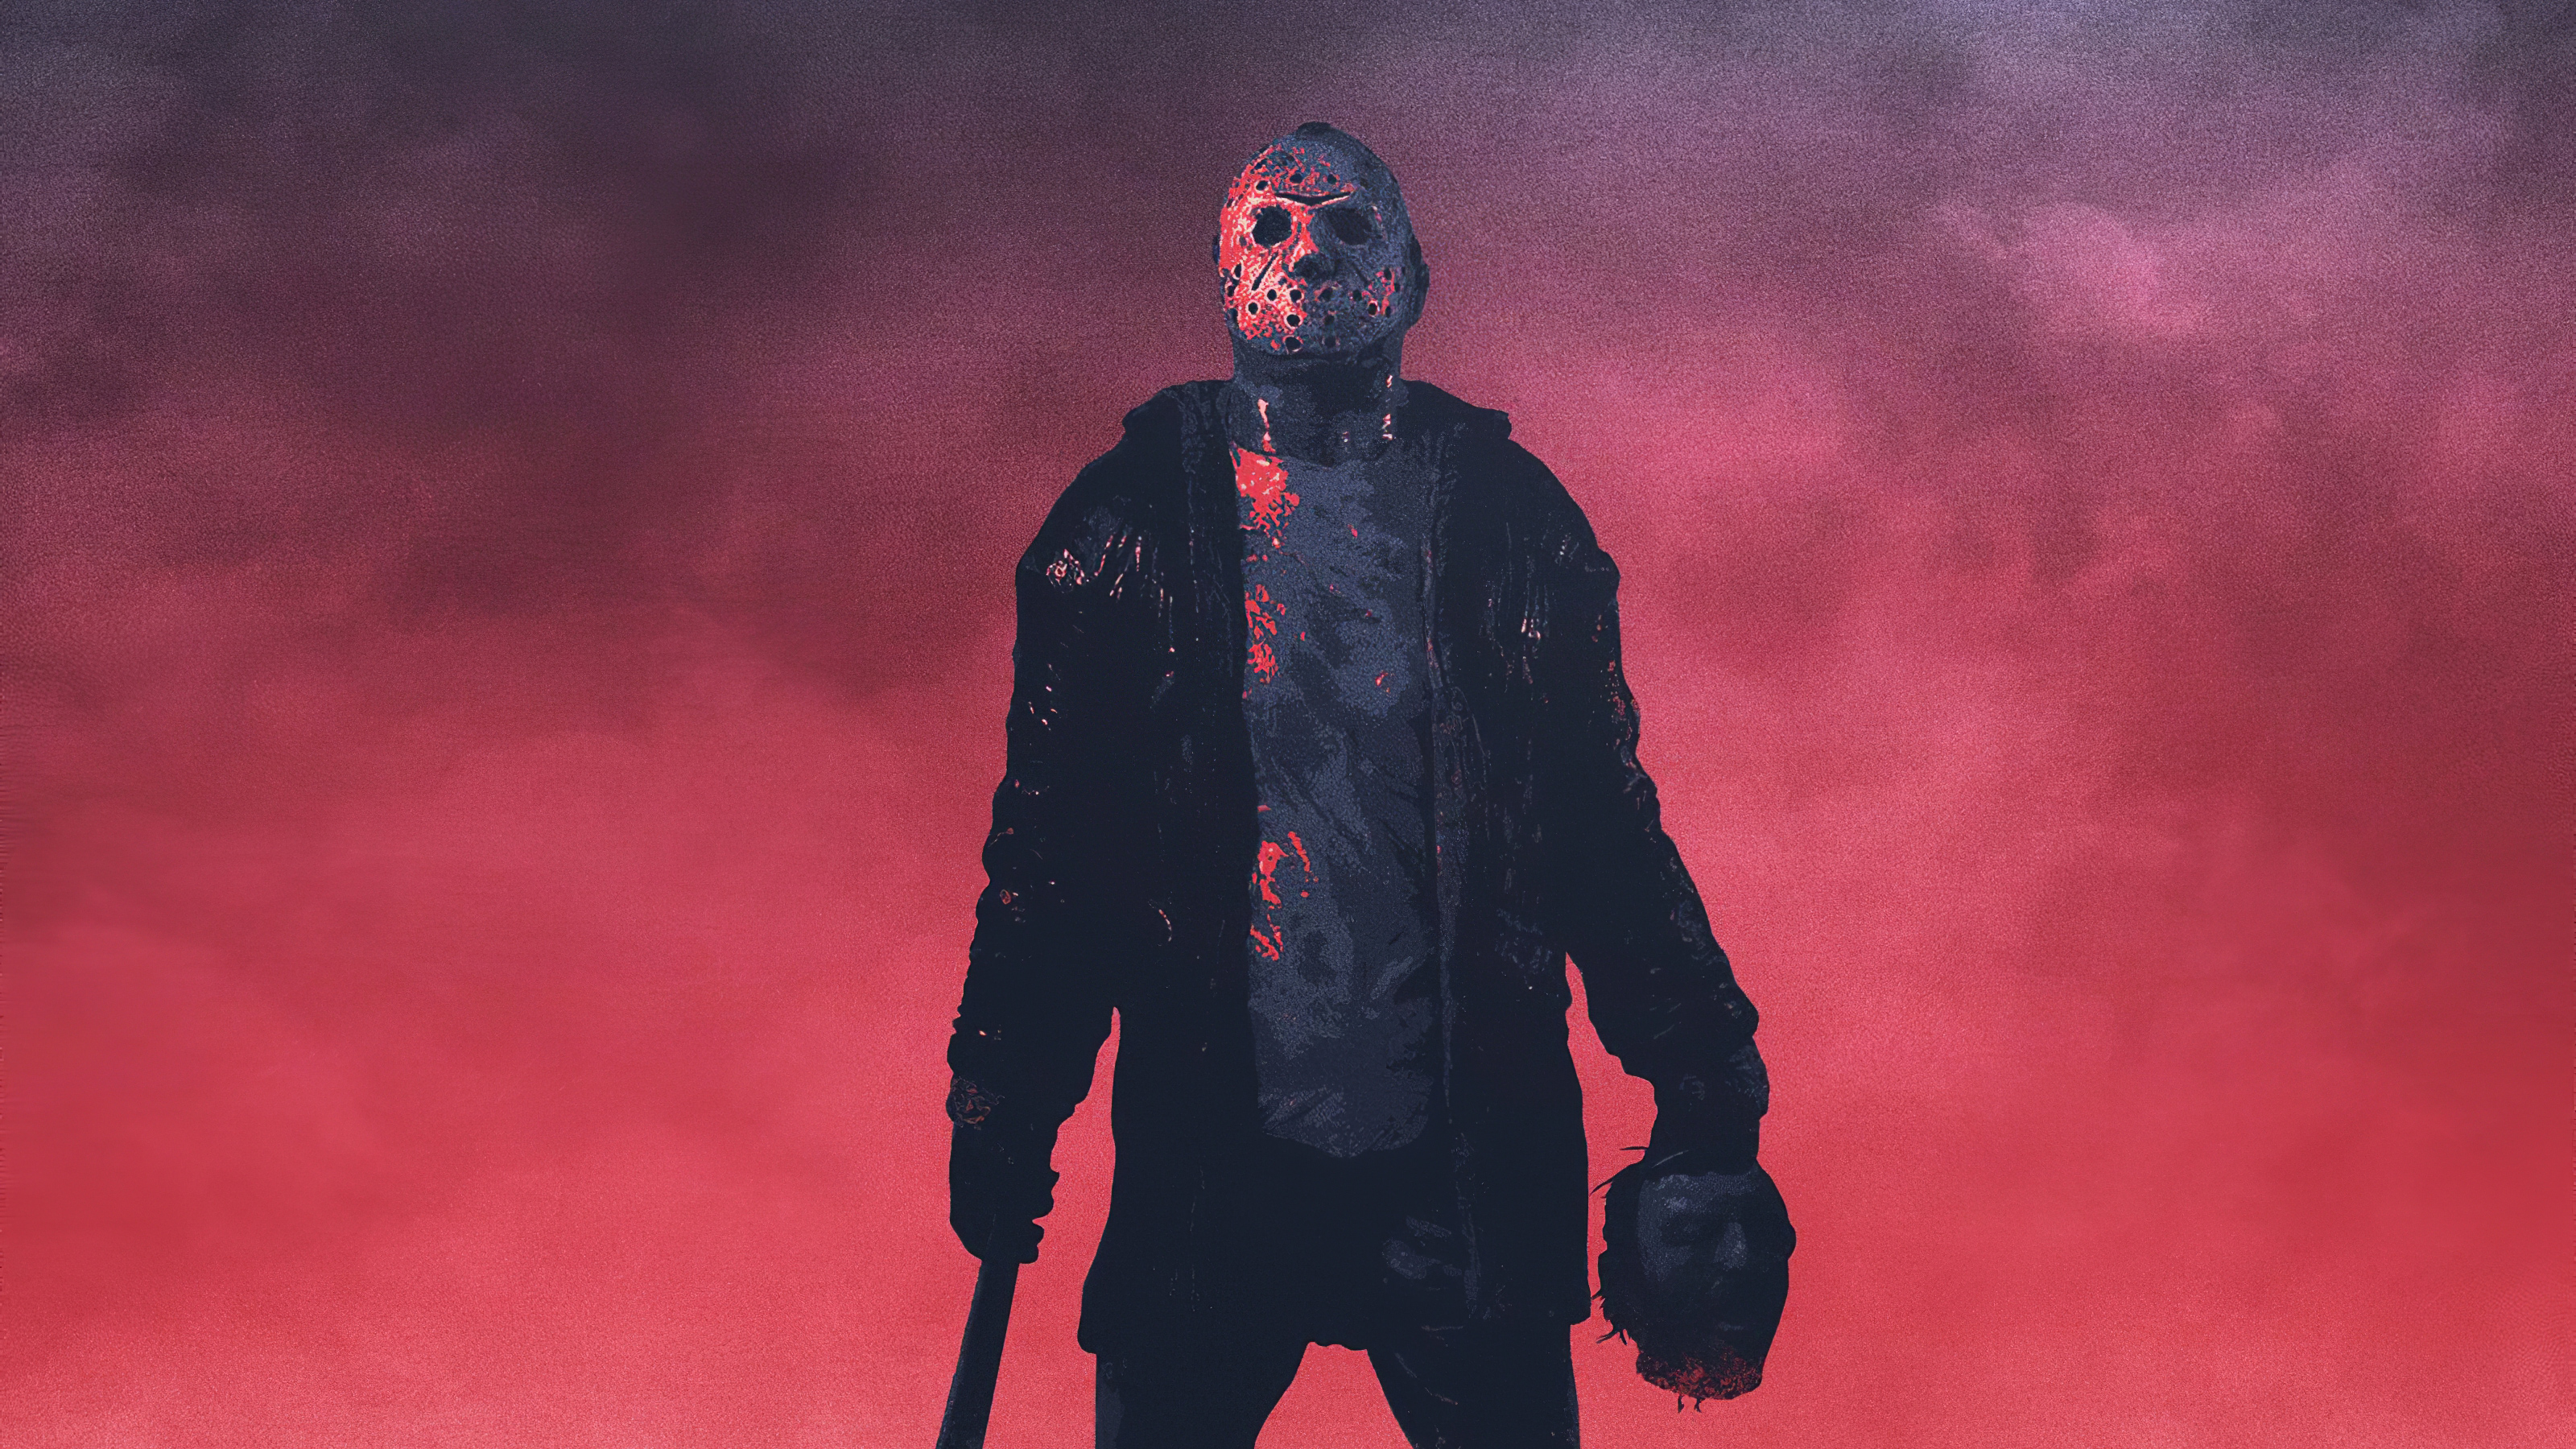 Friday The 13Th Wallpapers